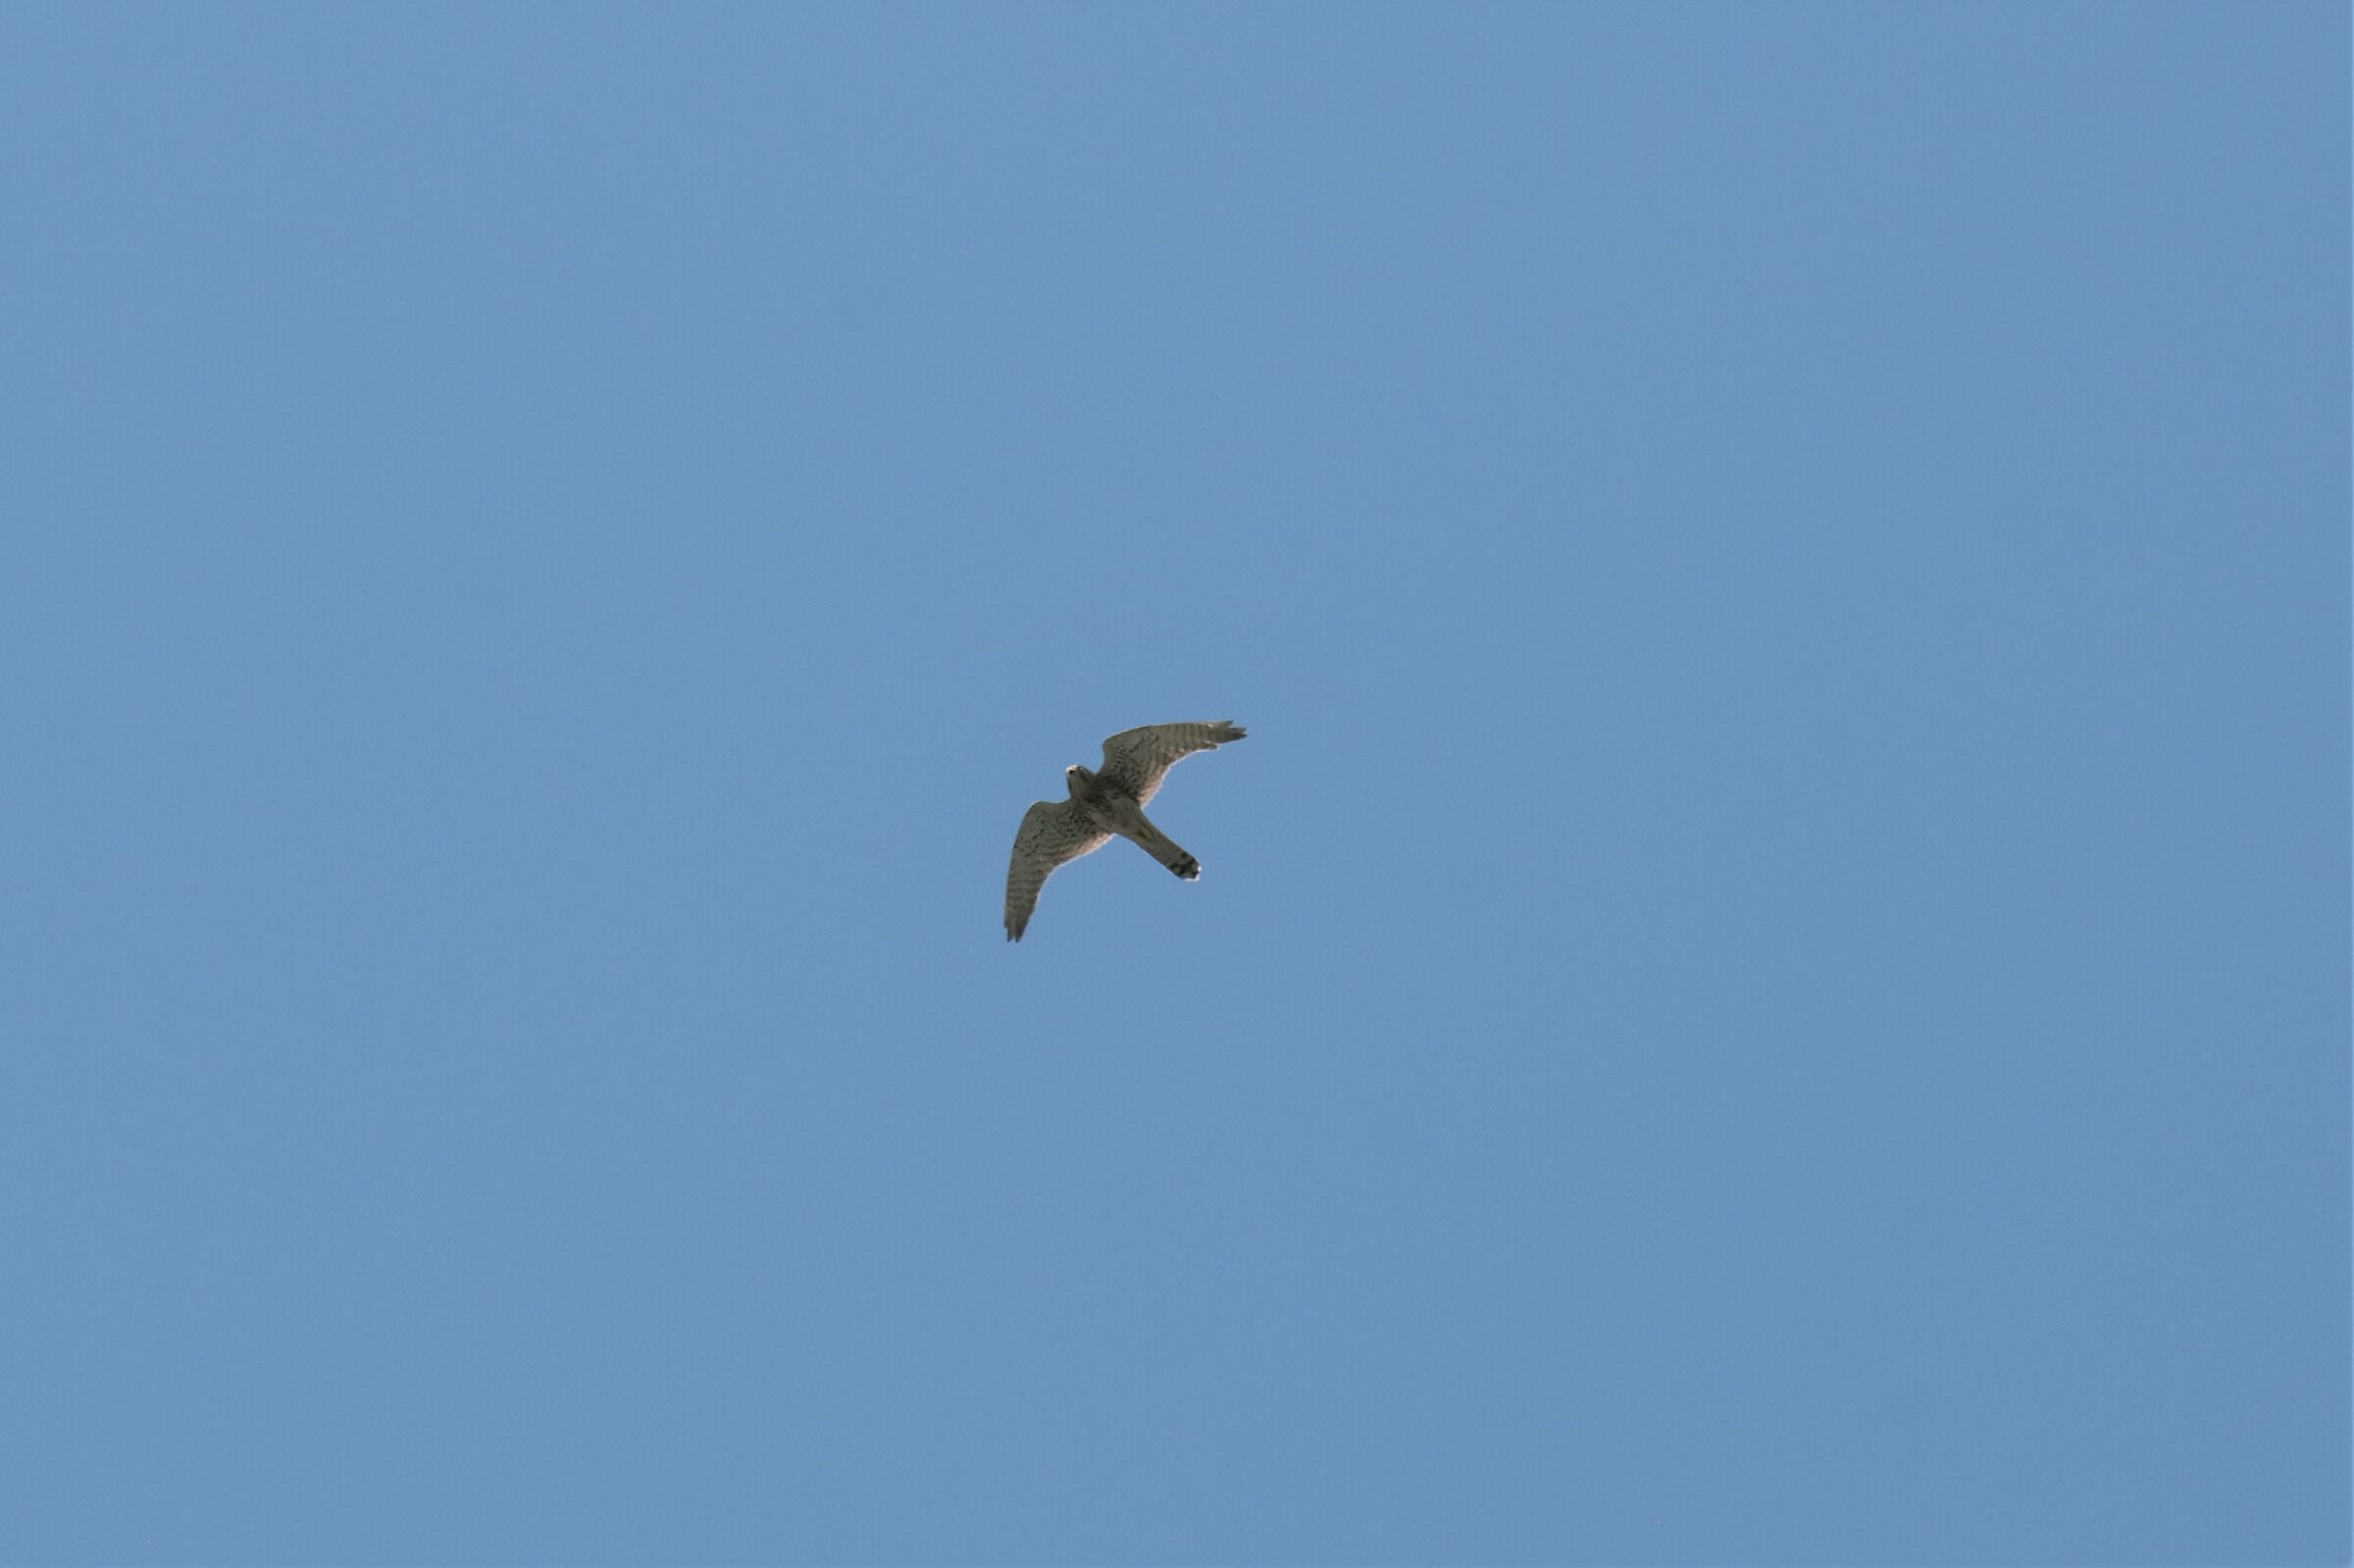 a happy encounter and you only have a 200 Peregrine Falcon ...